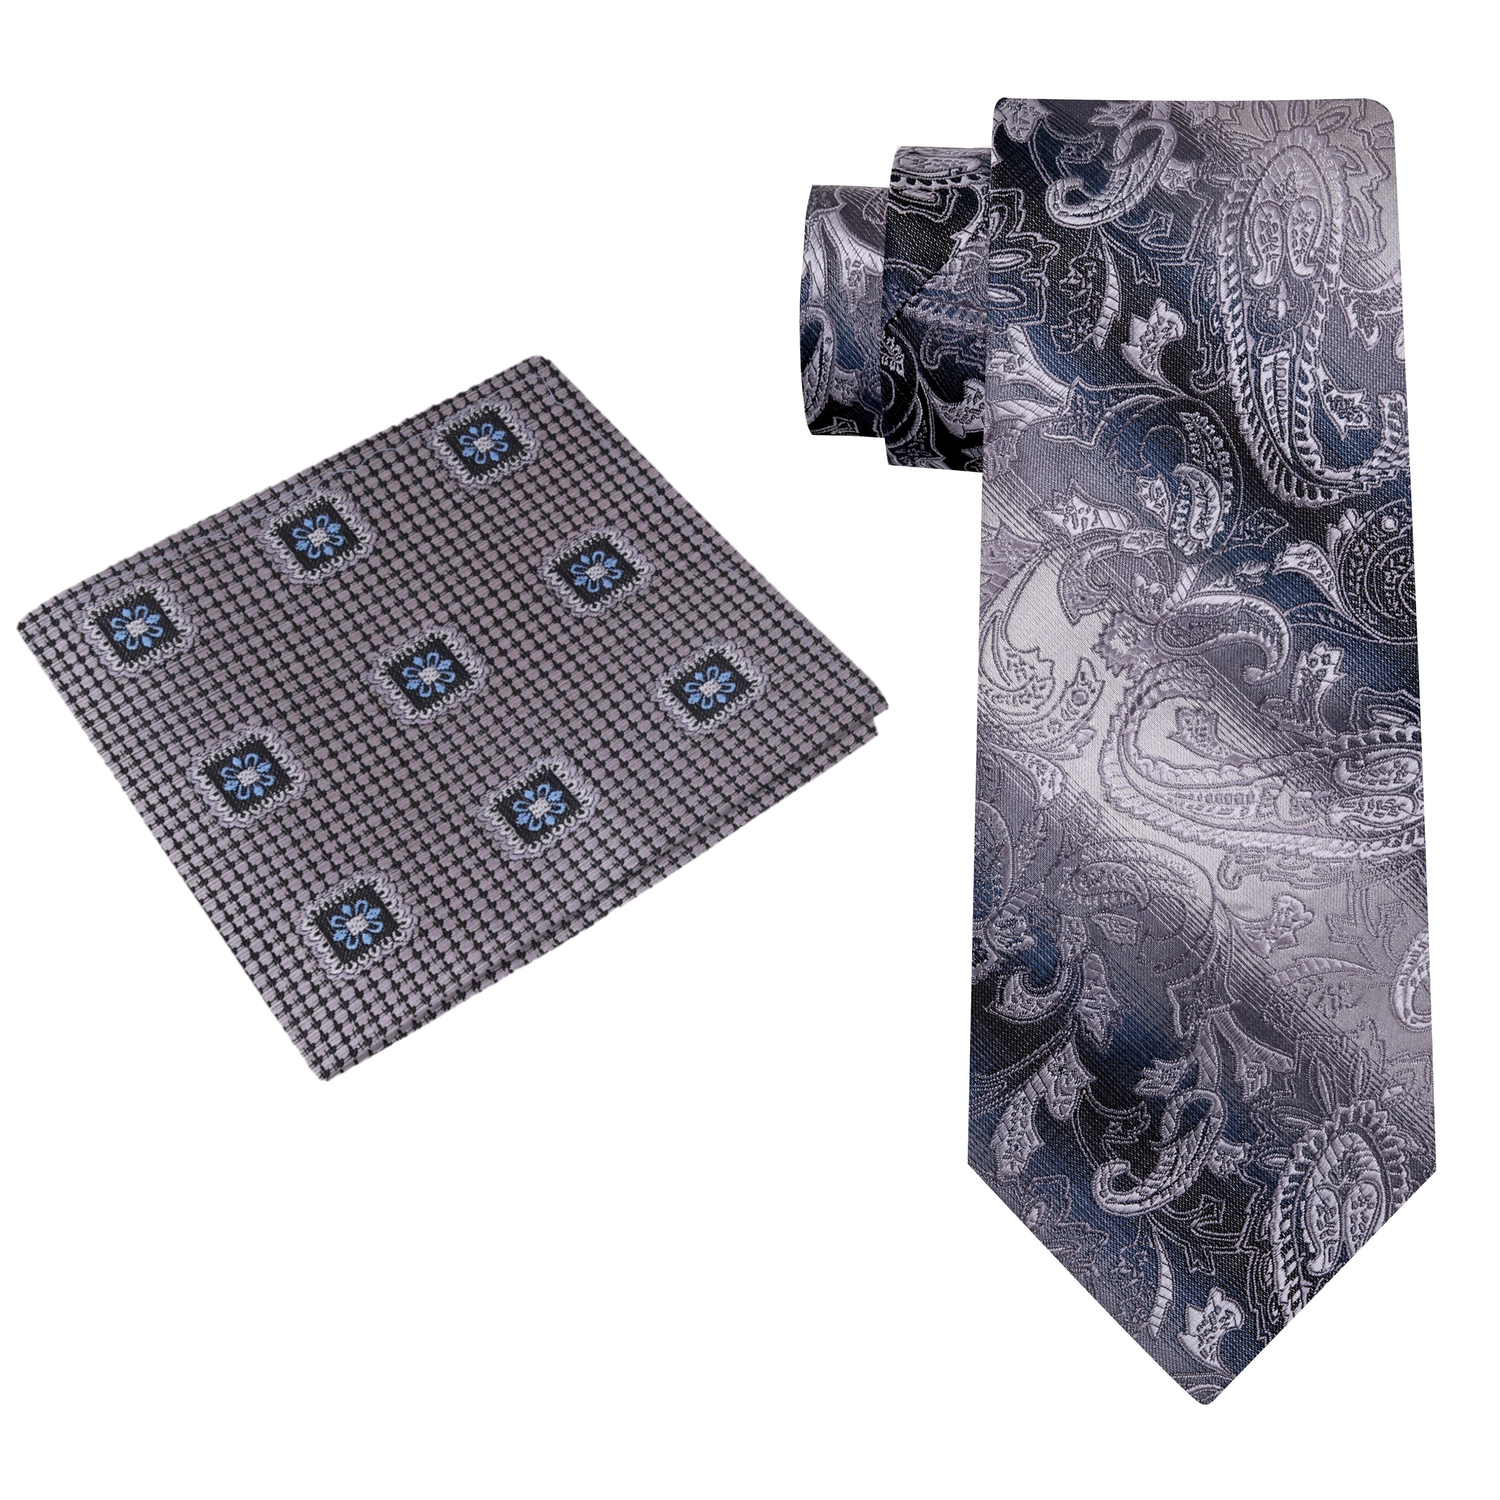 Grey and Silver Paisley Necktie and Accenting Grey Pocket Square View 2